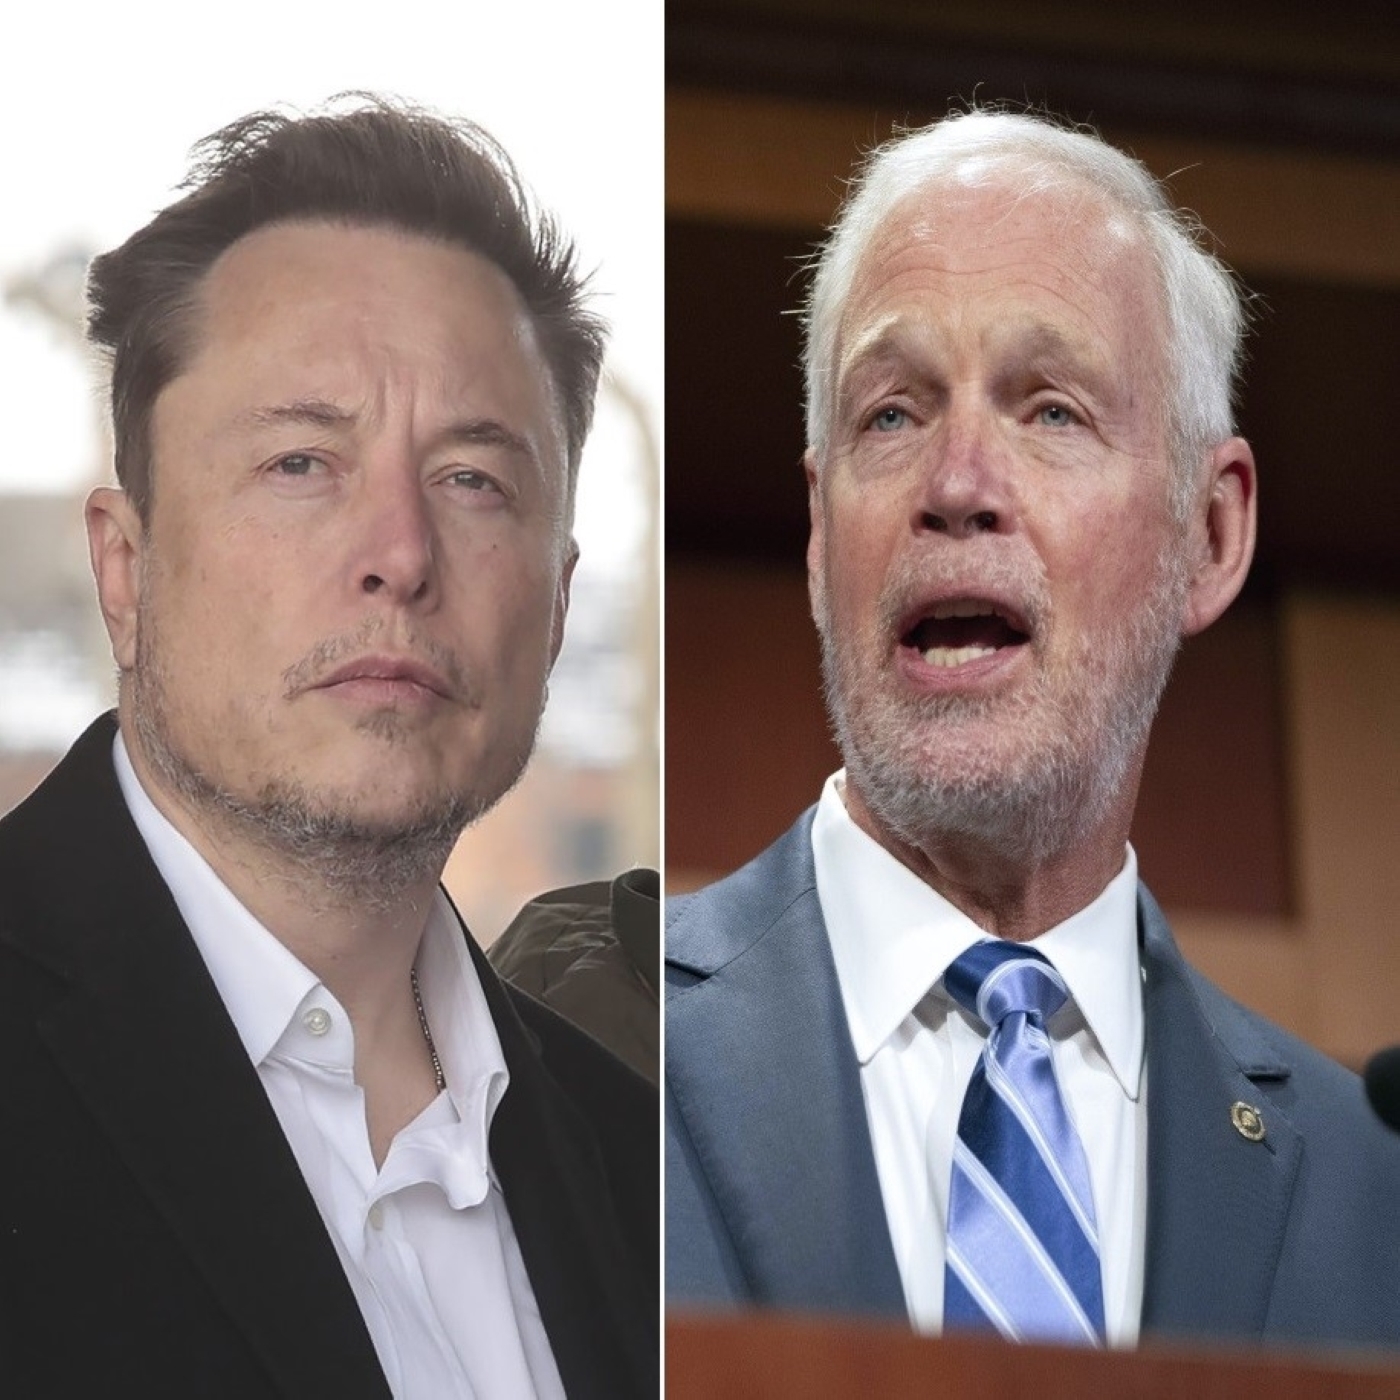 Wisconsin's Ron Johnson tag teams with Elon Musk 